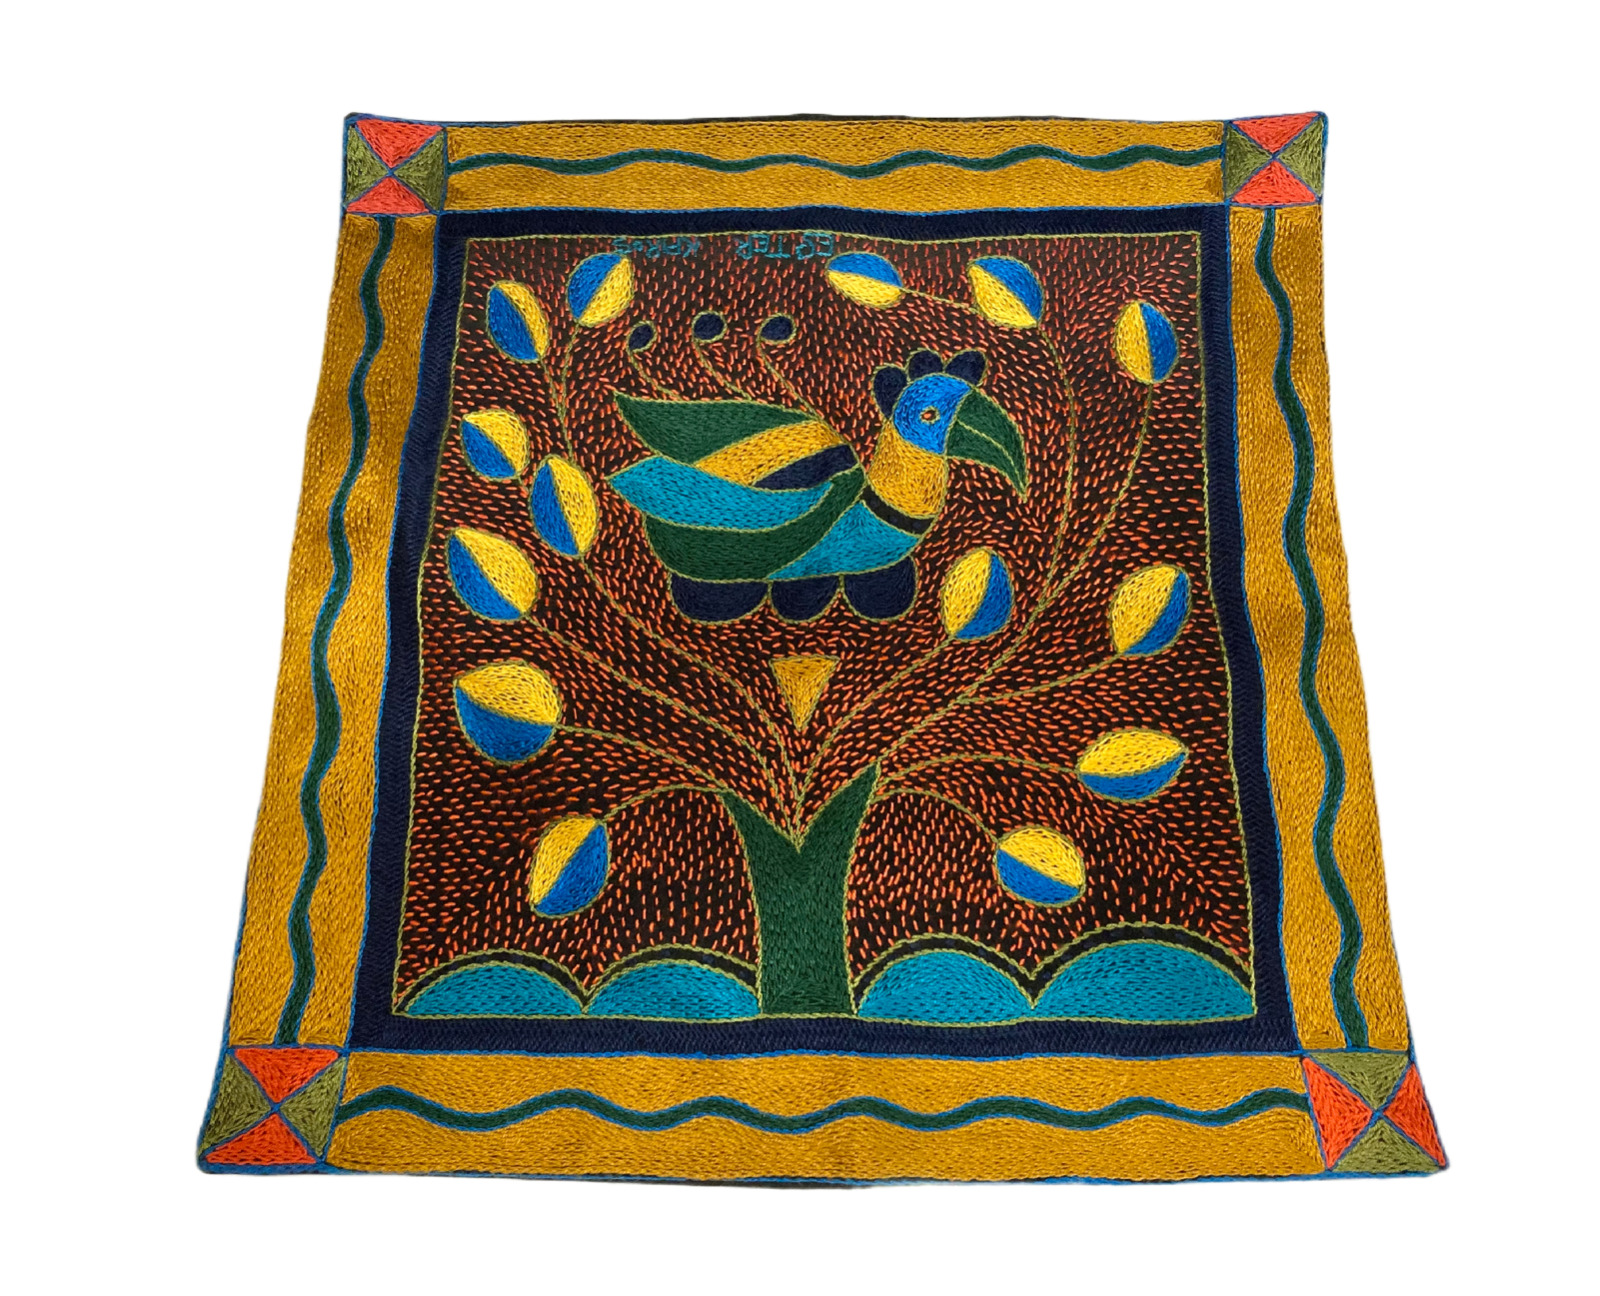 RARE Vintage New Kaross Pillow Cover - Hand Embroidered - Yellow Blue Bird